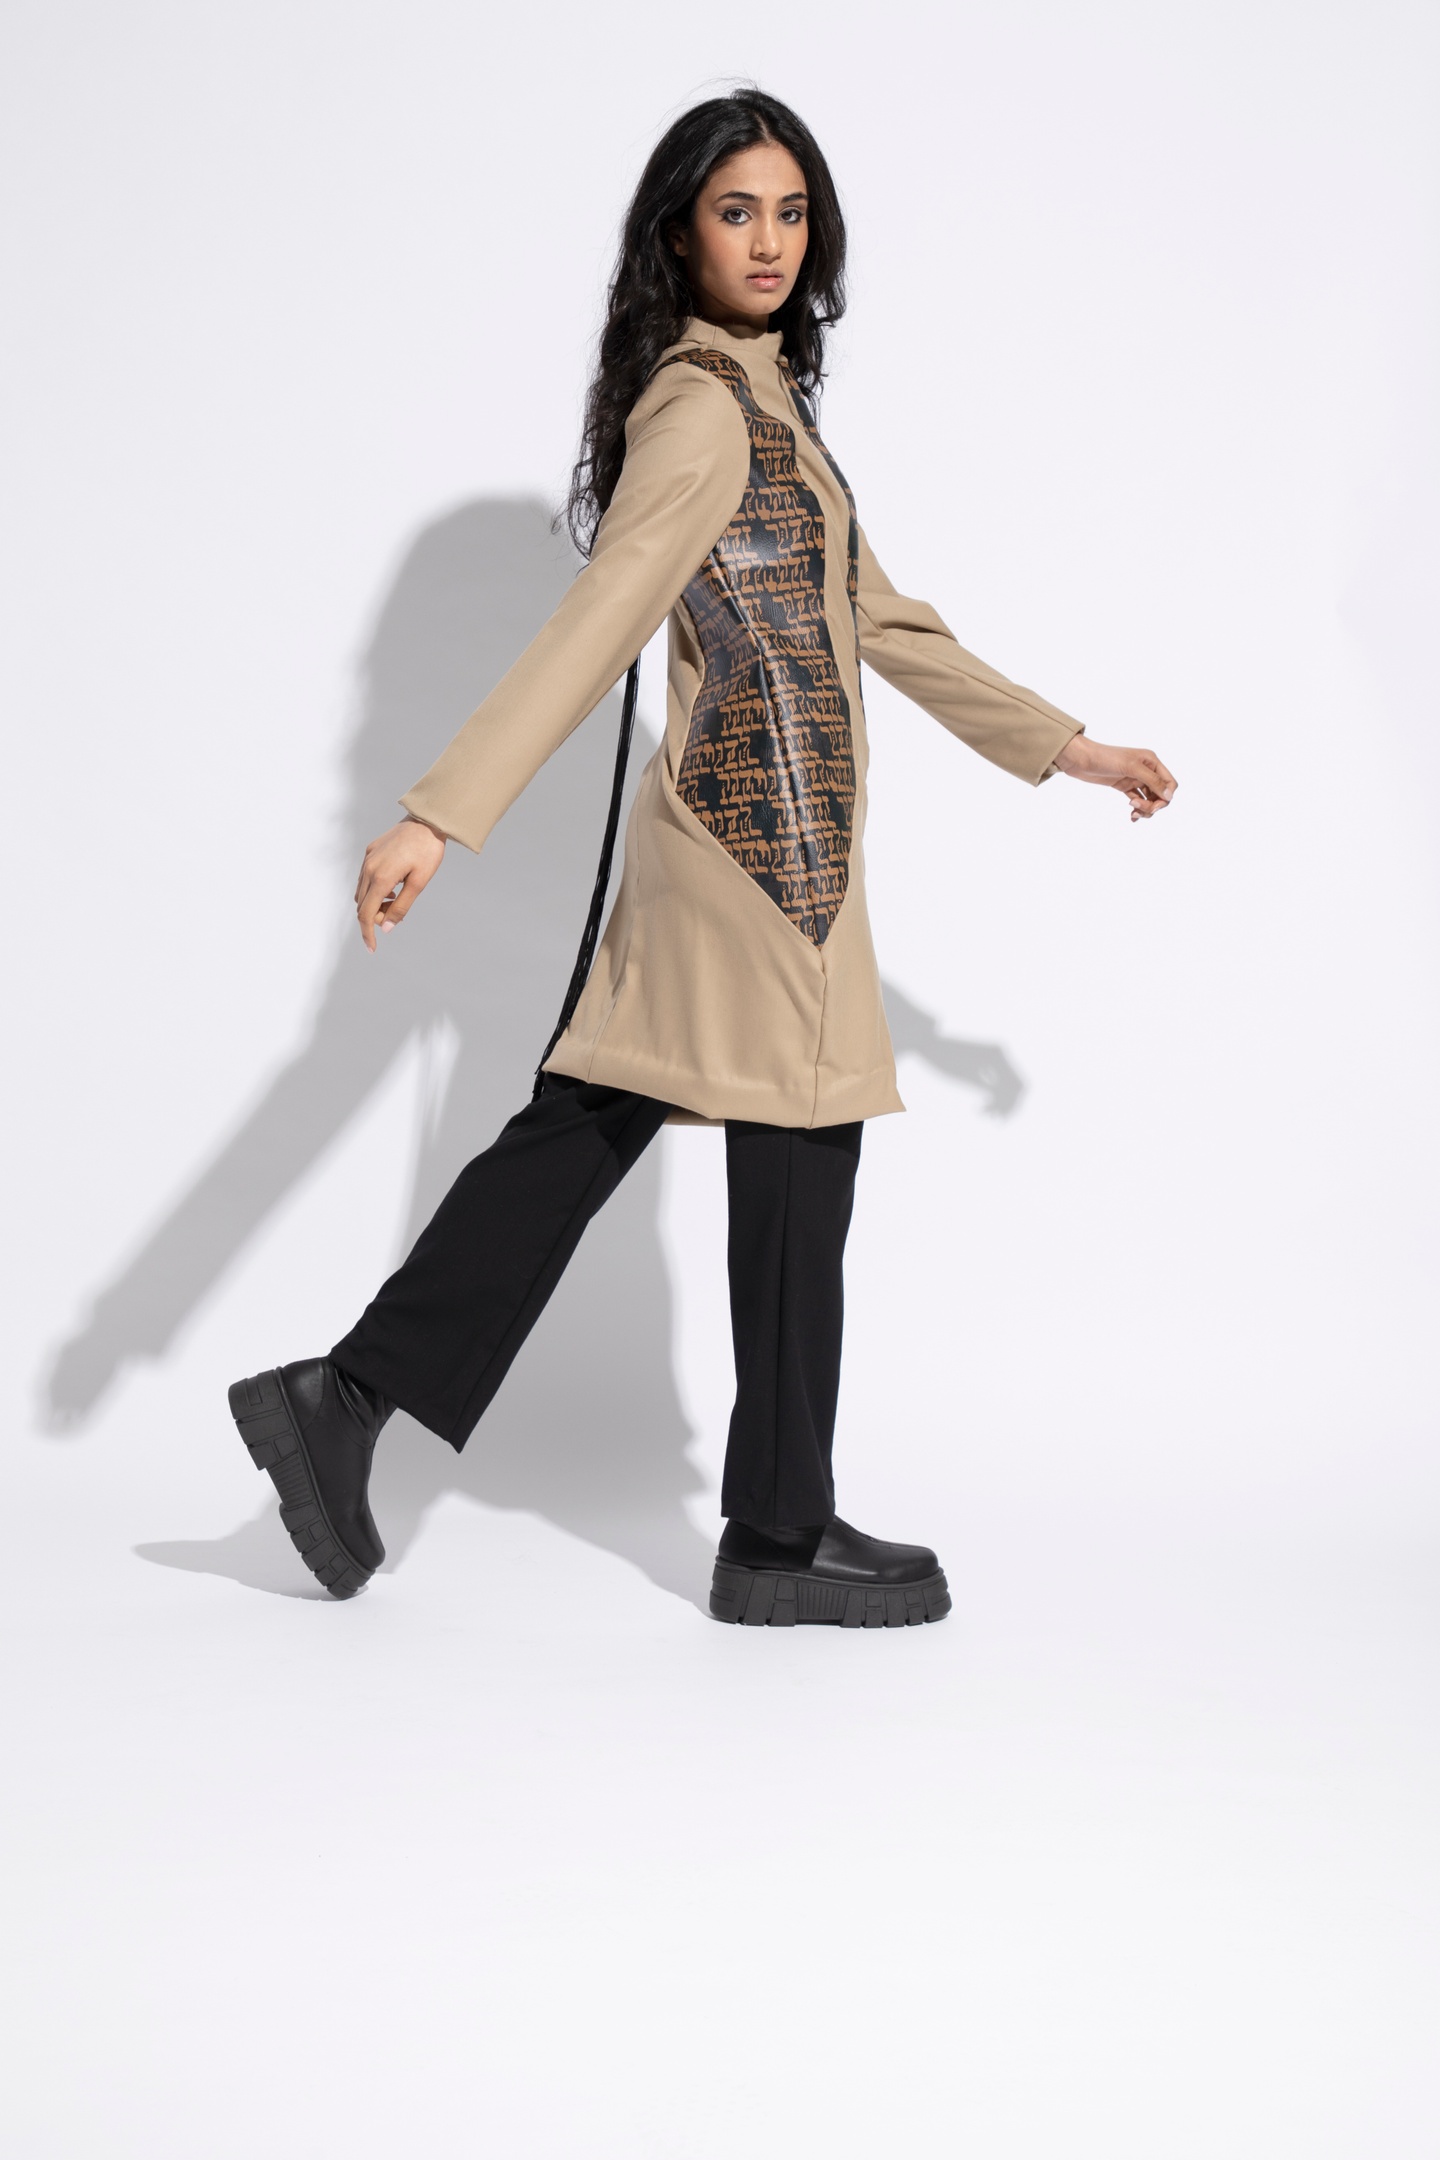 Model wears a beige thigh-length tunic with two side panels running from shoulder to hip made from black leather imprinted with Hebrew characters in sienna. The model wears black bootcut pants and black combat boots.